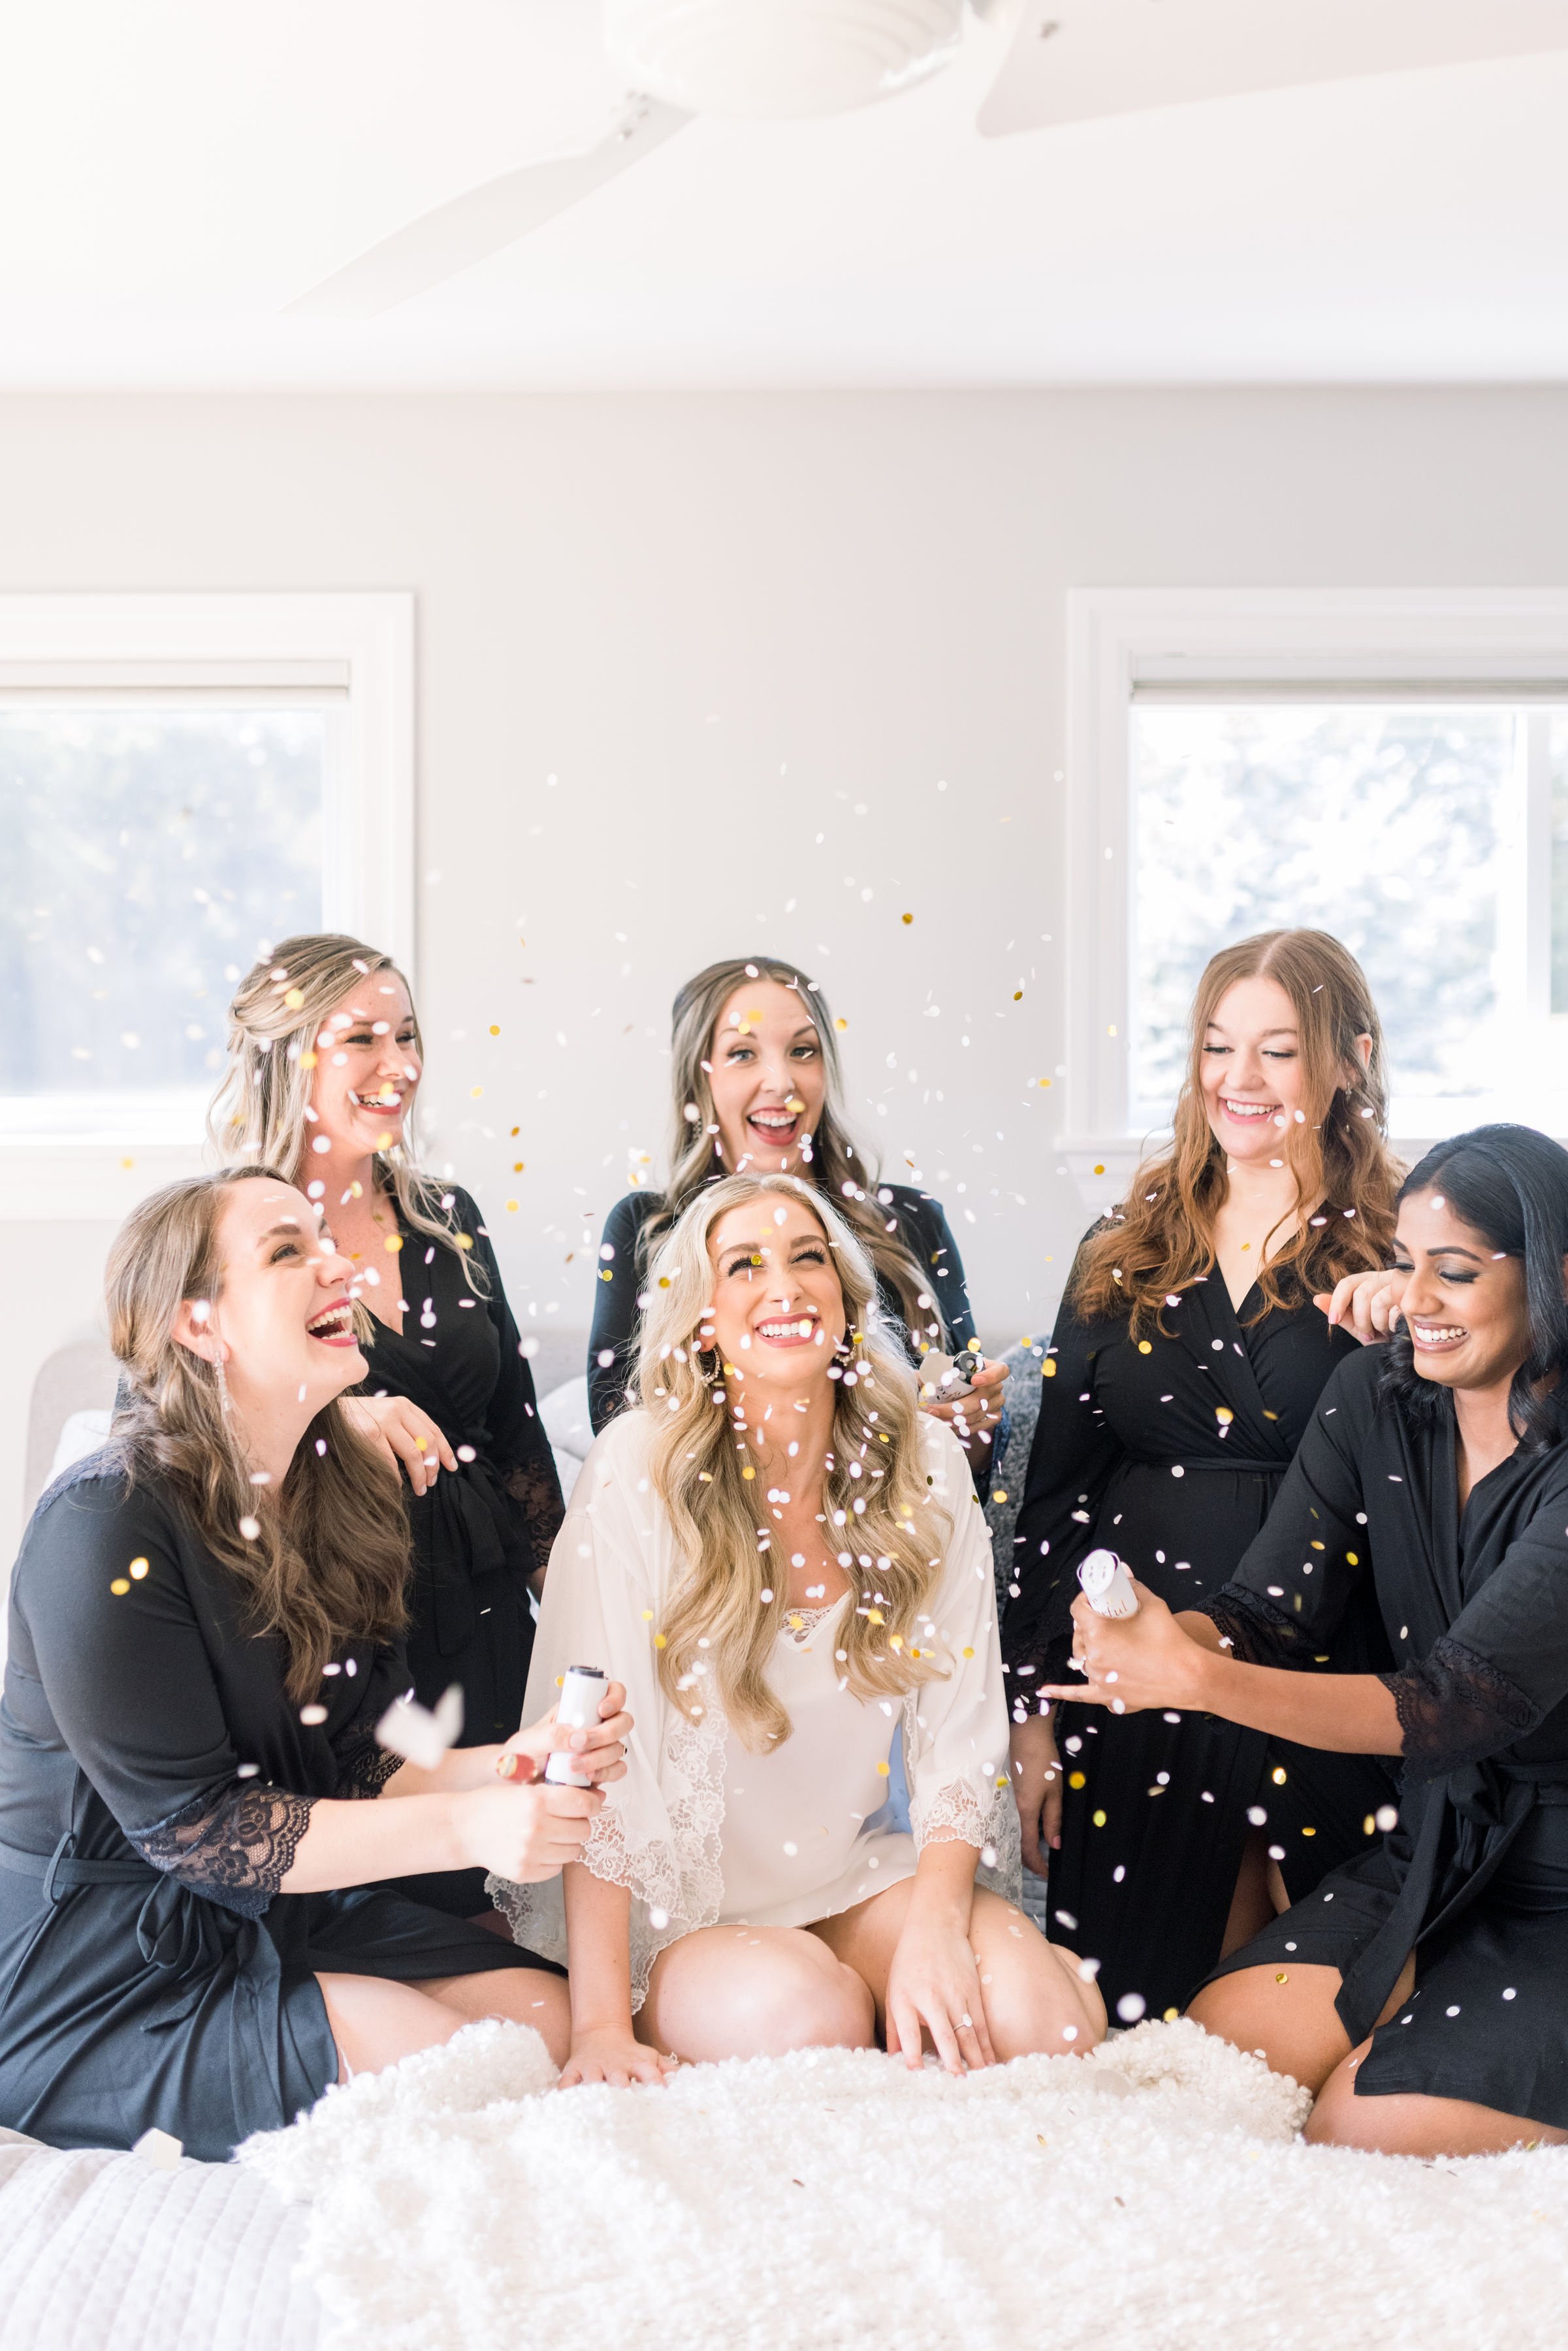  Bride in a white robe sitting on a bed with her bridesmaids was captured by Chelsea Mason Photography. bride getting ready pics #ChelseaMasonPhotography #ChelseaMasonWeddings #PrinceEdwardsCountyWeddings #SandbanksWeddings #ONweddingphotographer 